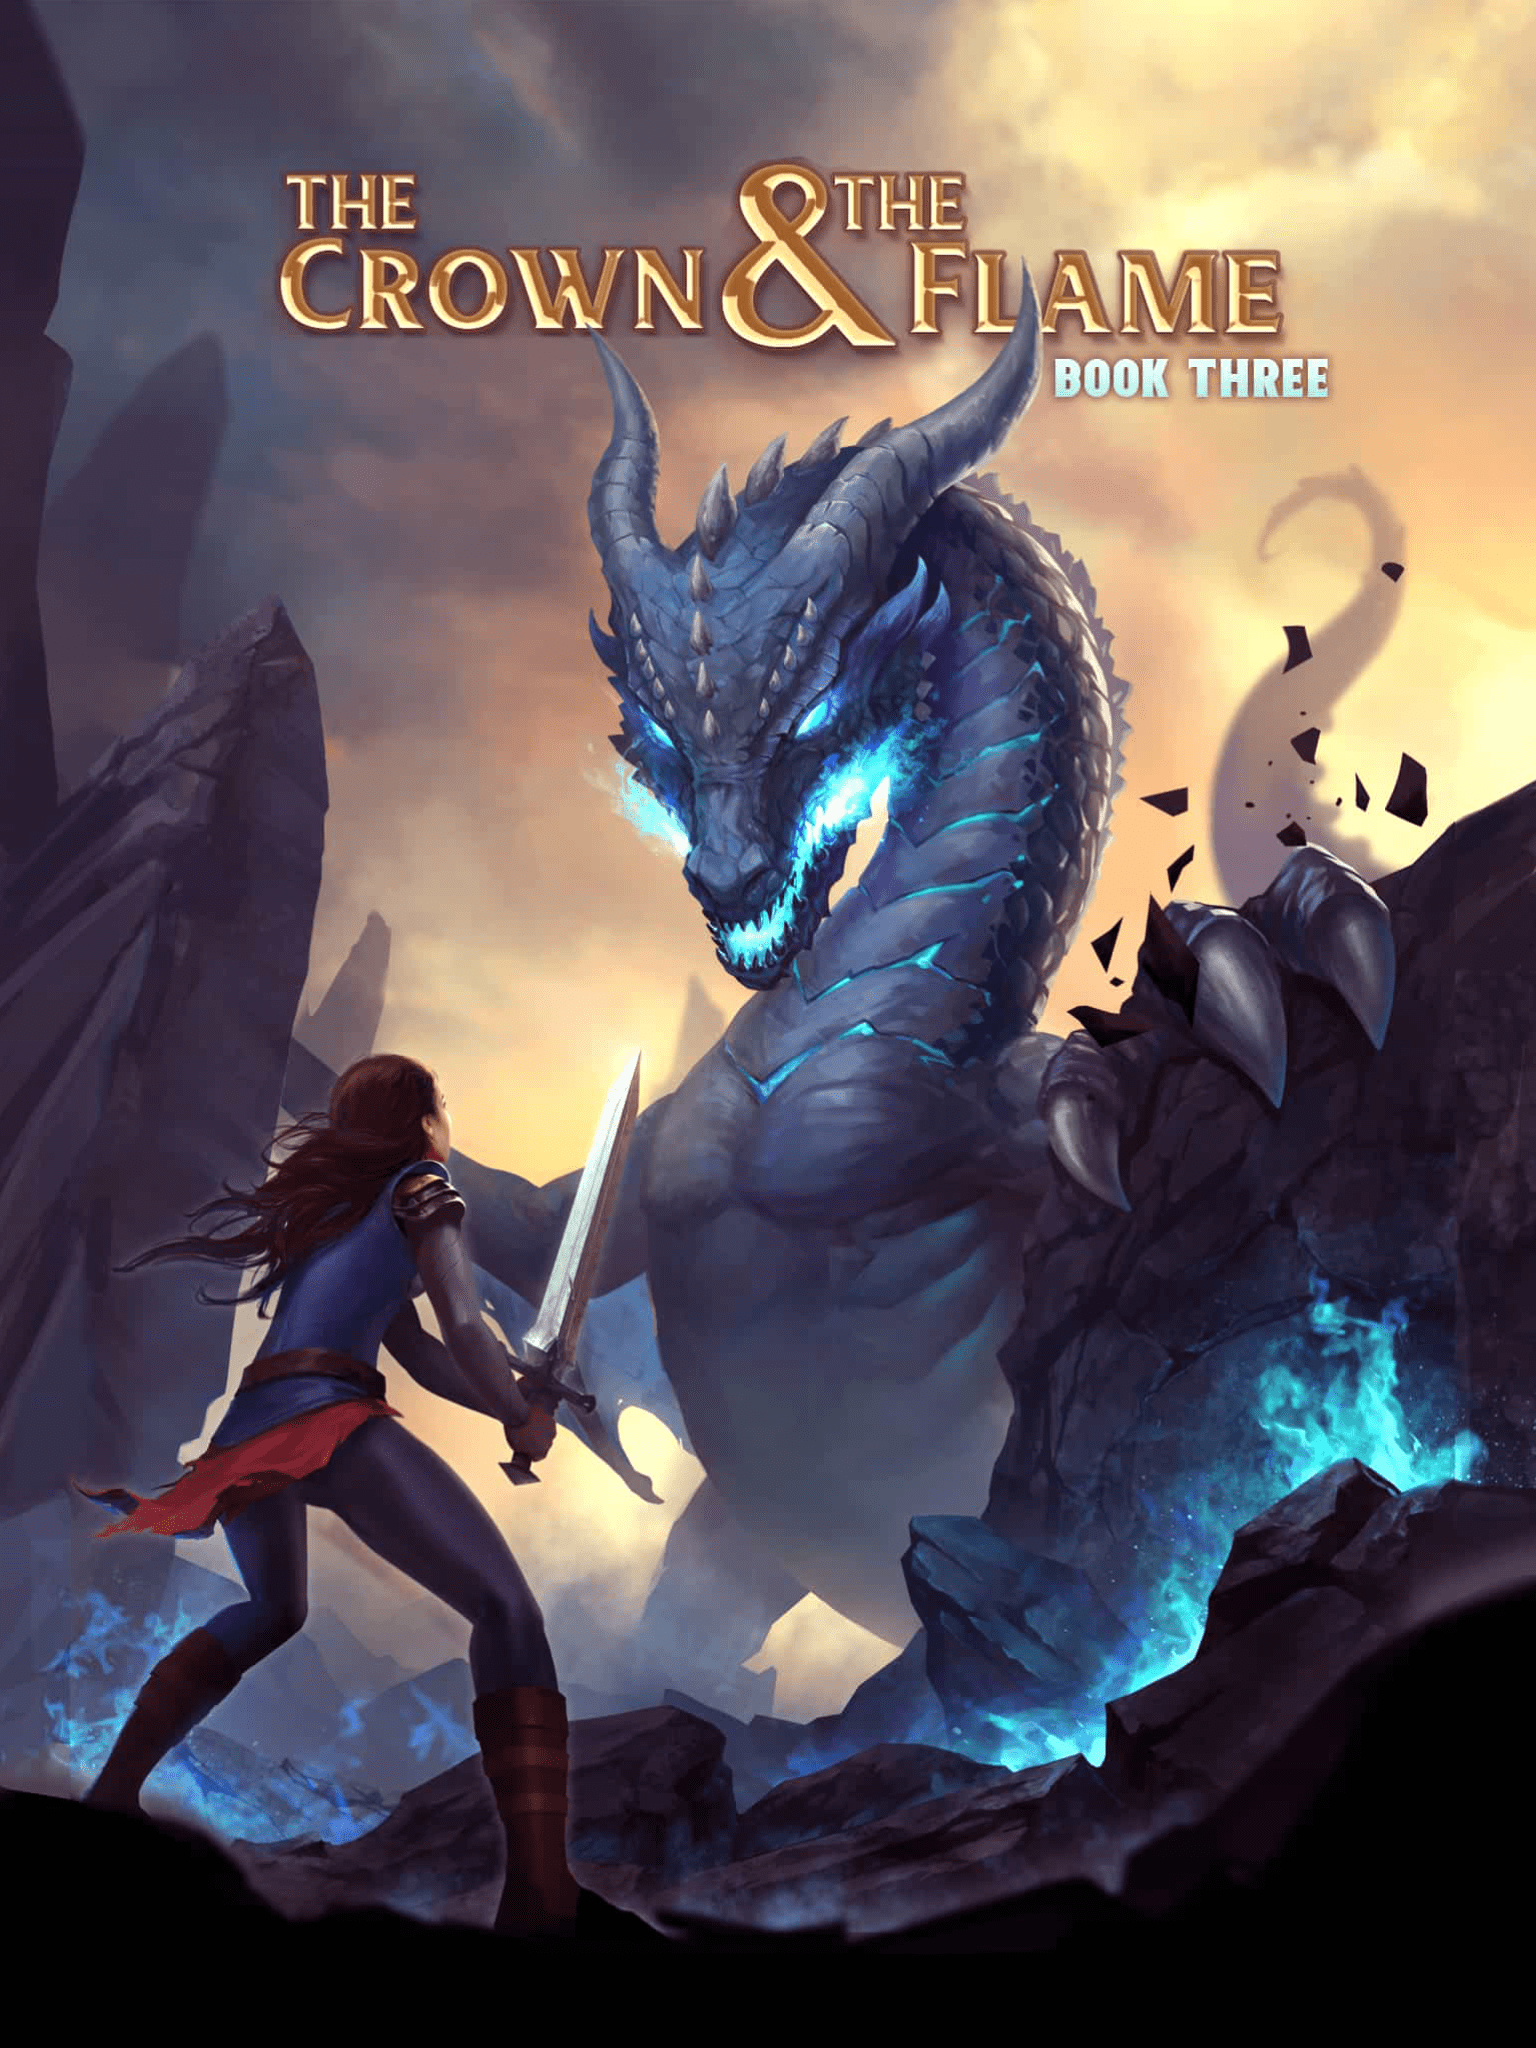 Choices Game The Crown And The Flame Book 2 Walkthrough